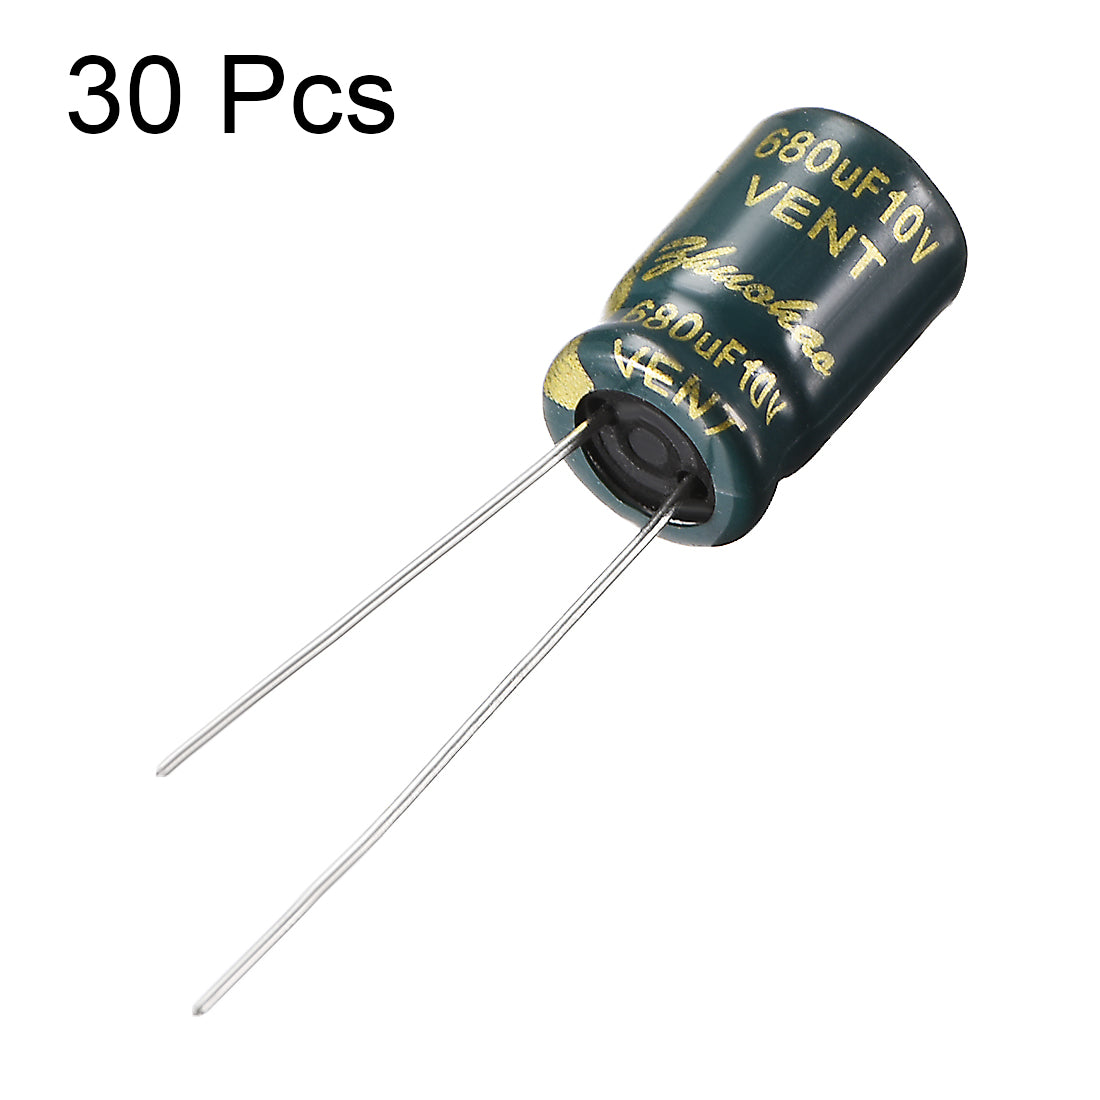 uxcell Uxcell Aluminum Radial Electrolytic Capacitor Low ESR Green with 680UF 10V 105 Celsius Life 3000H 8 x12 mm High Ripple Current,Low Impedance 30pcs